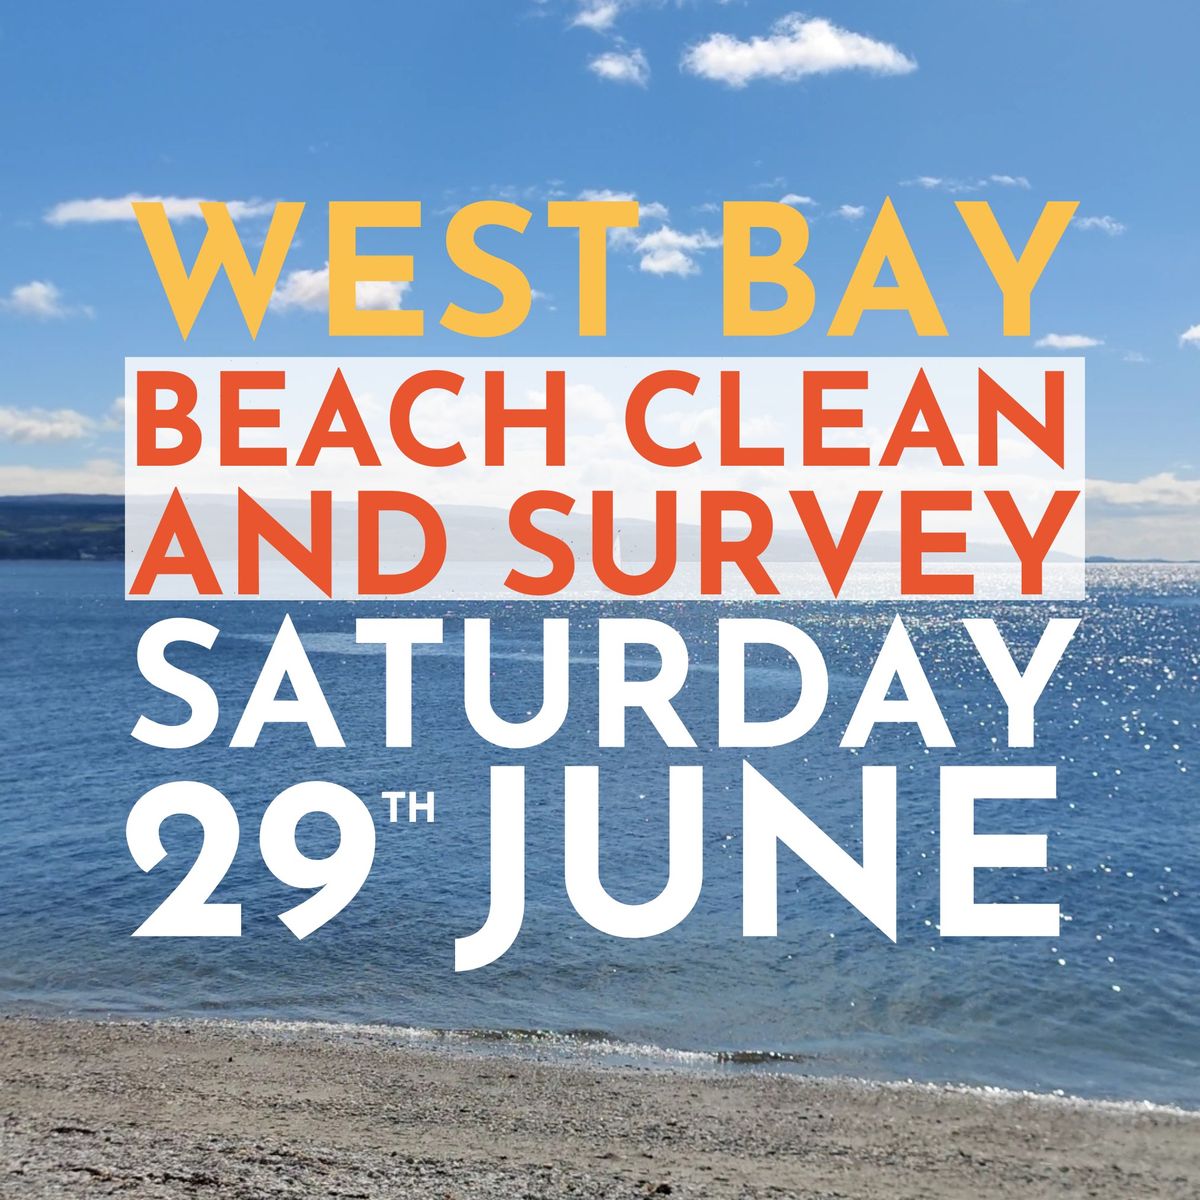 West Bay Beach Clean and Survey